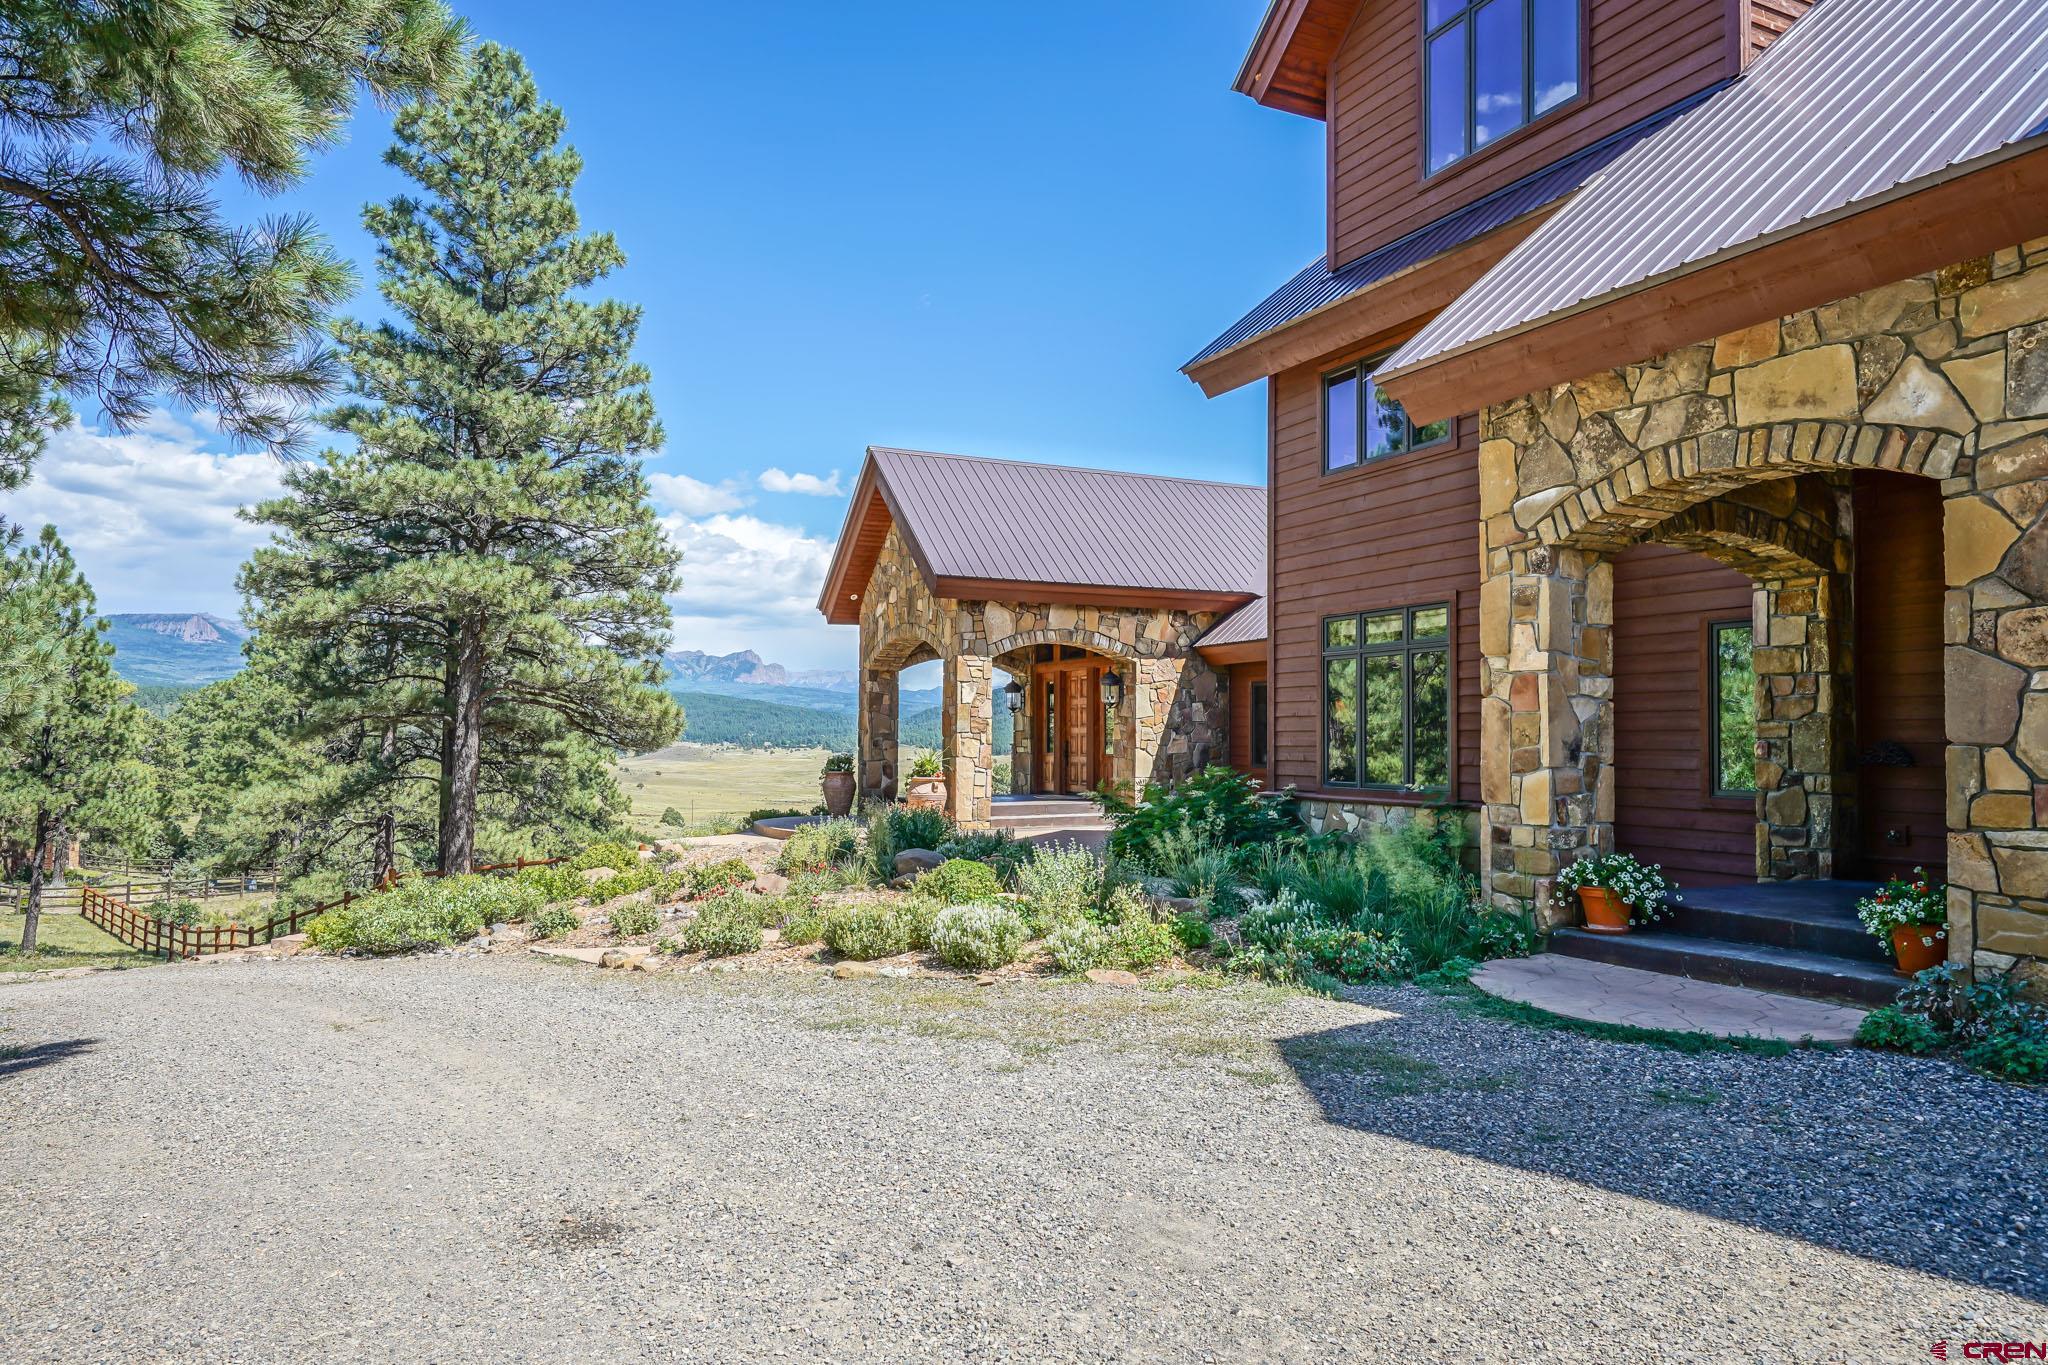 100 & 100A Buckboard Place, Pagosa Springs, CO 81147 Listing Photo  5